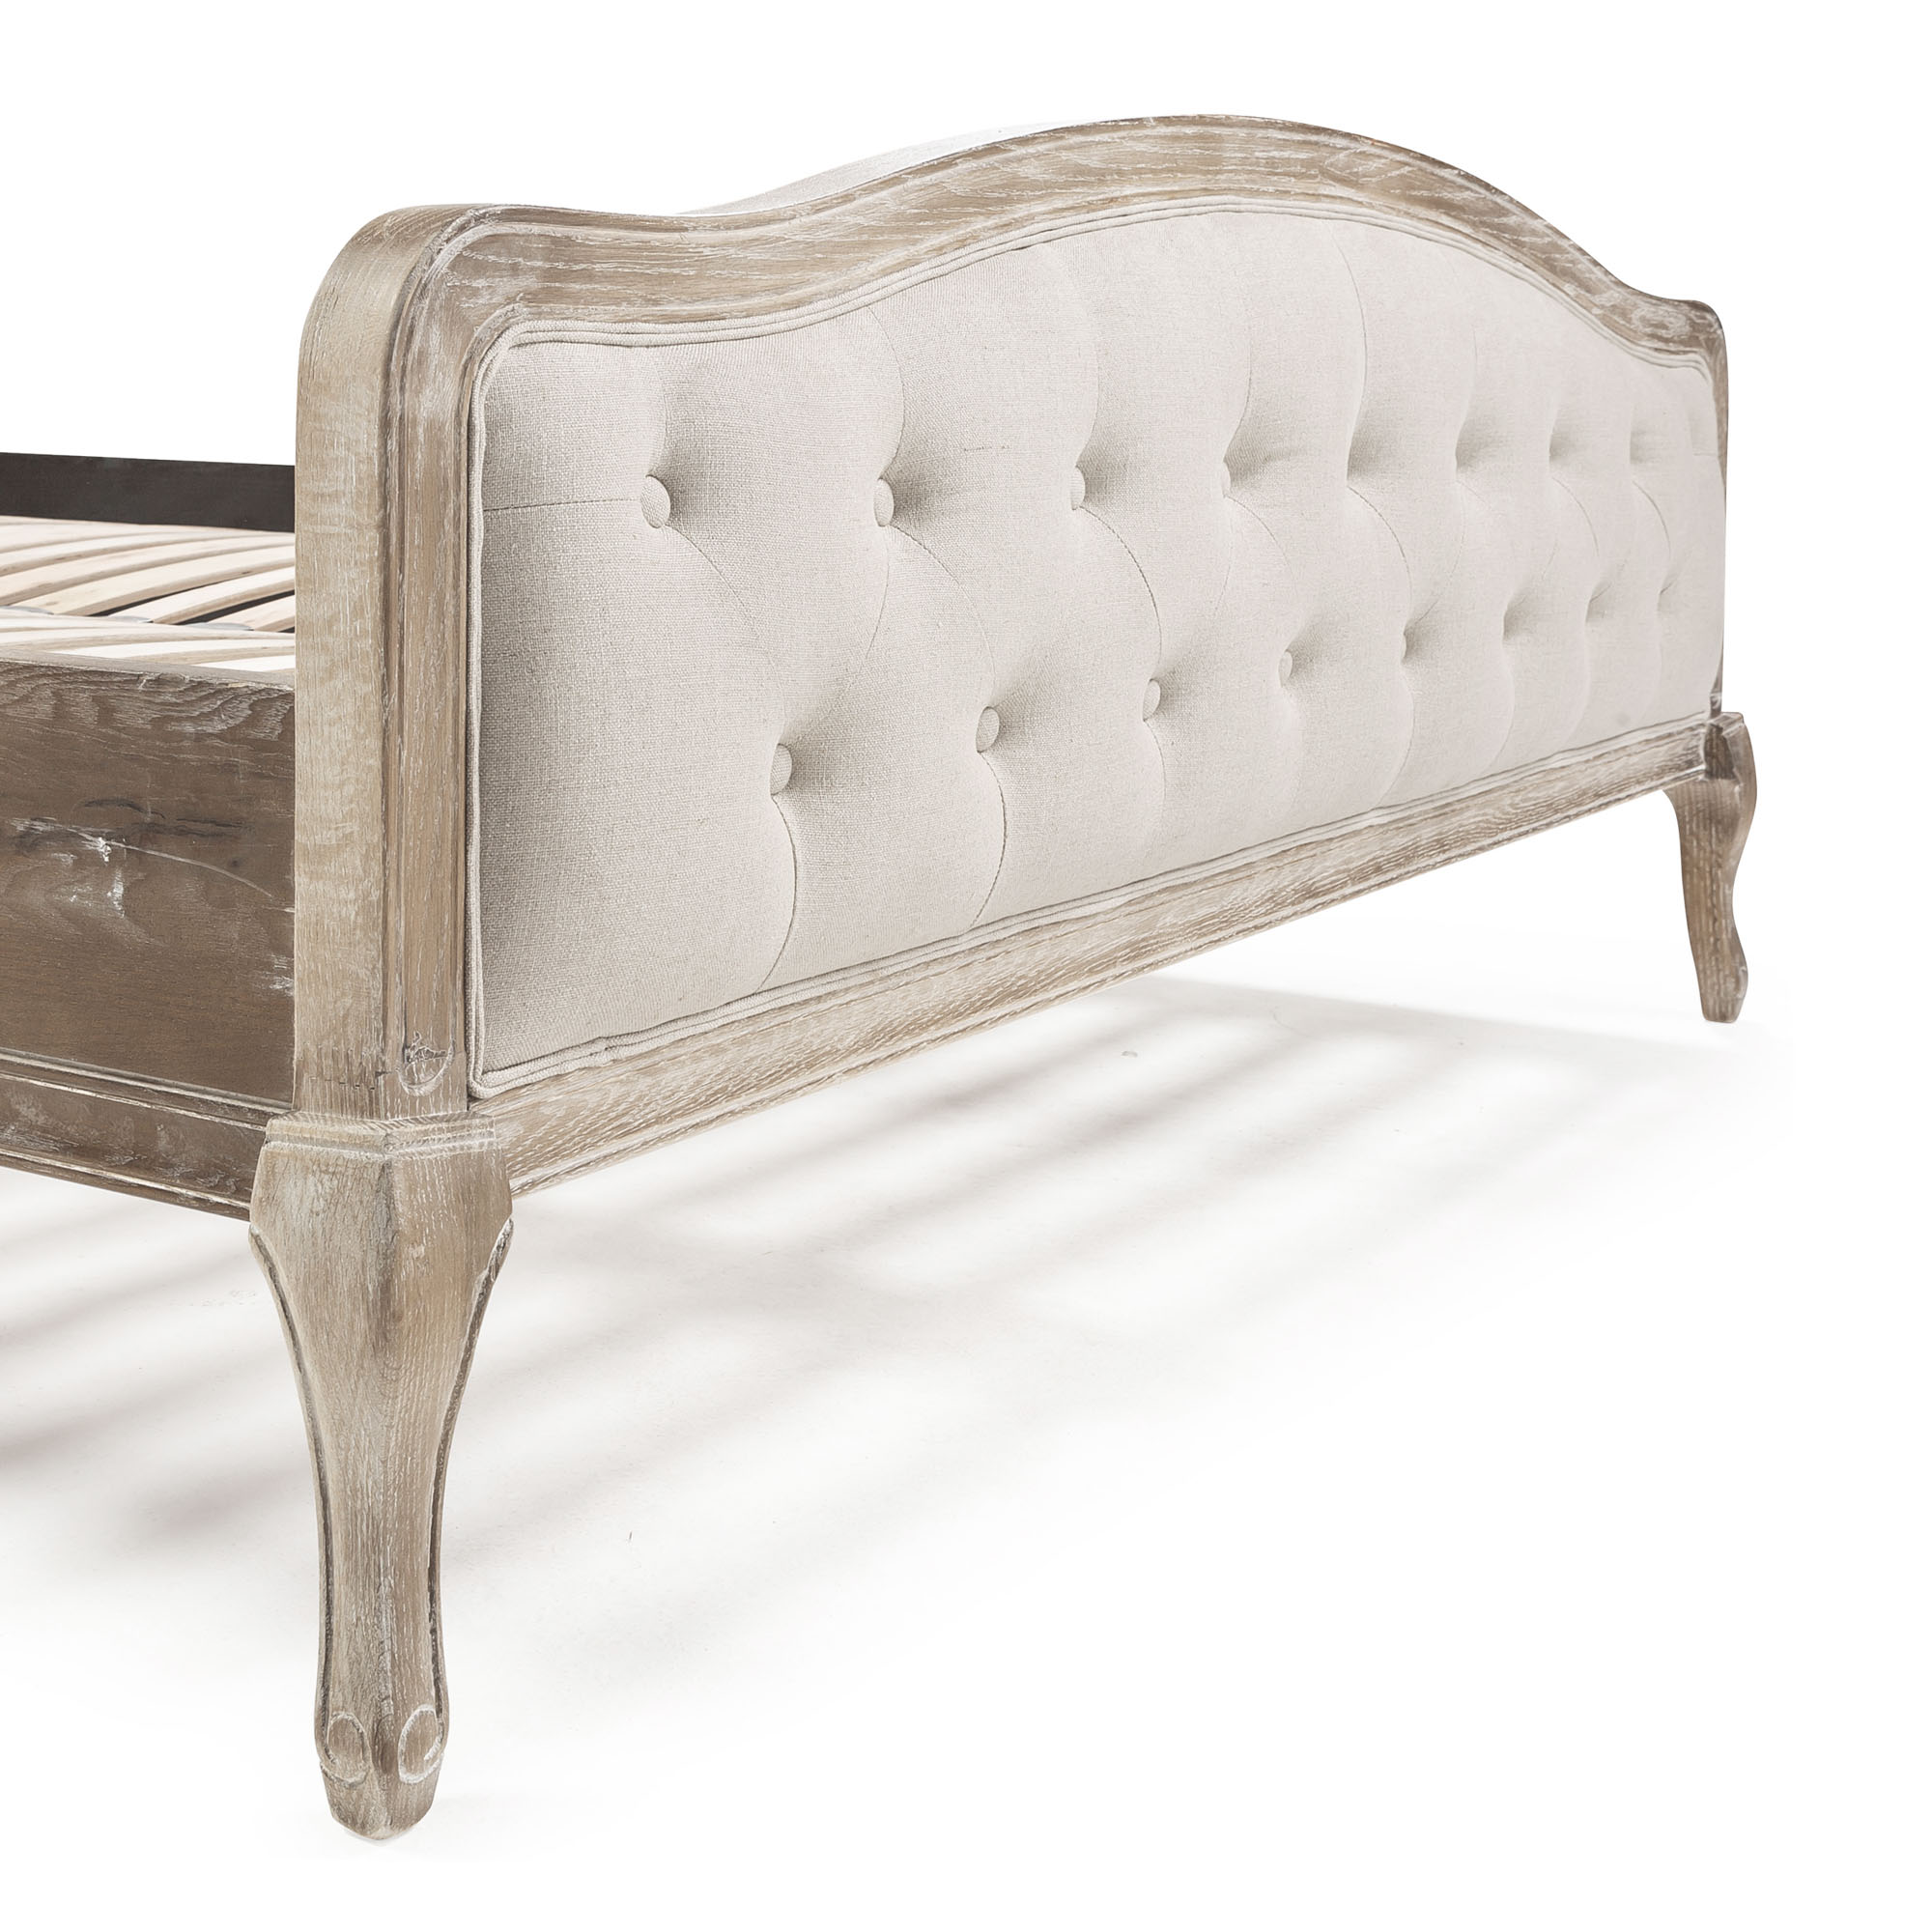 Arielle French Weathered Limed Ash Buttoned Upholstered High Foot Board Bed – Super King Size